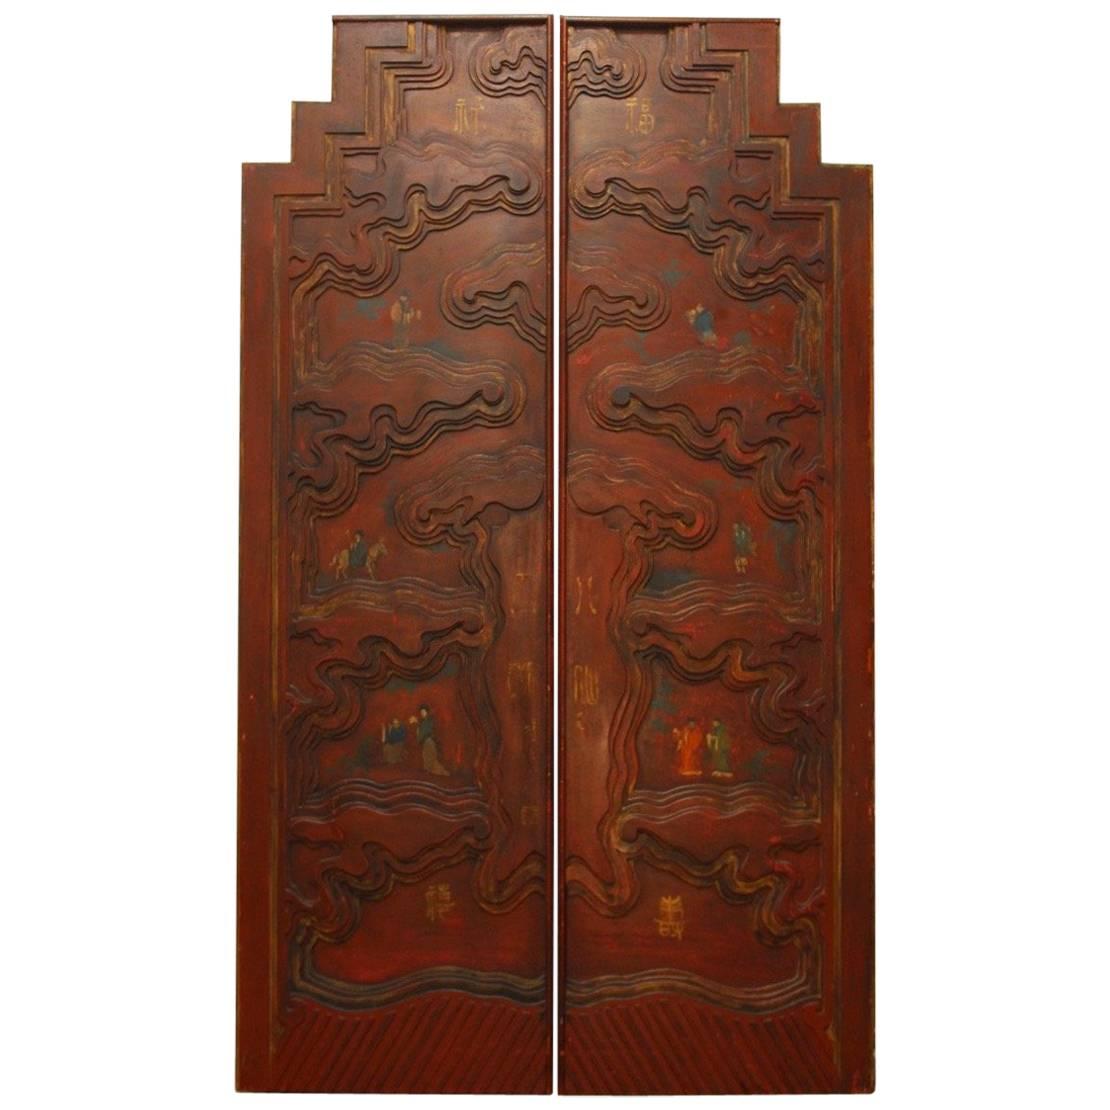 Pair of Chinese Carved Temple Courtyard Door Panels